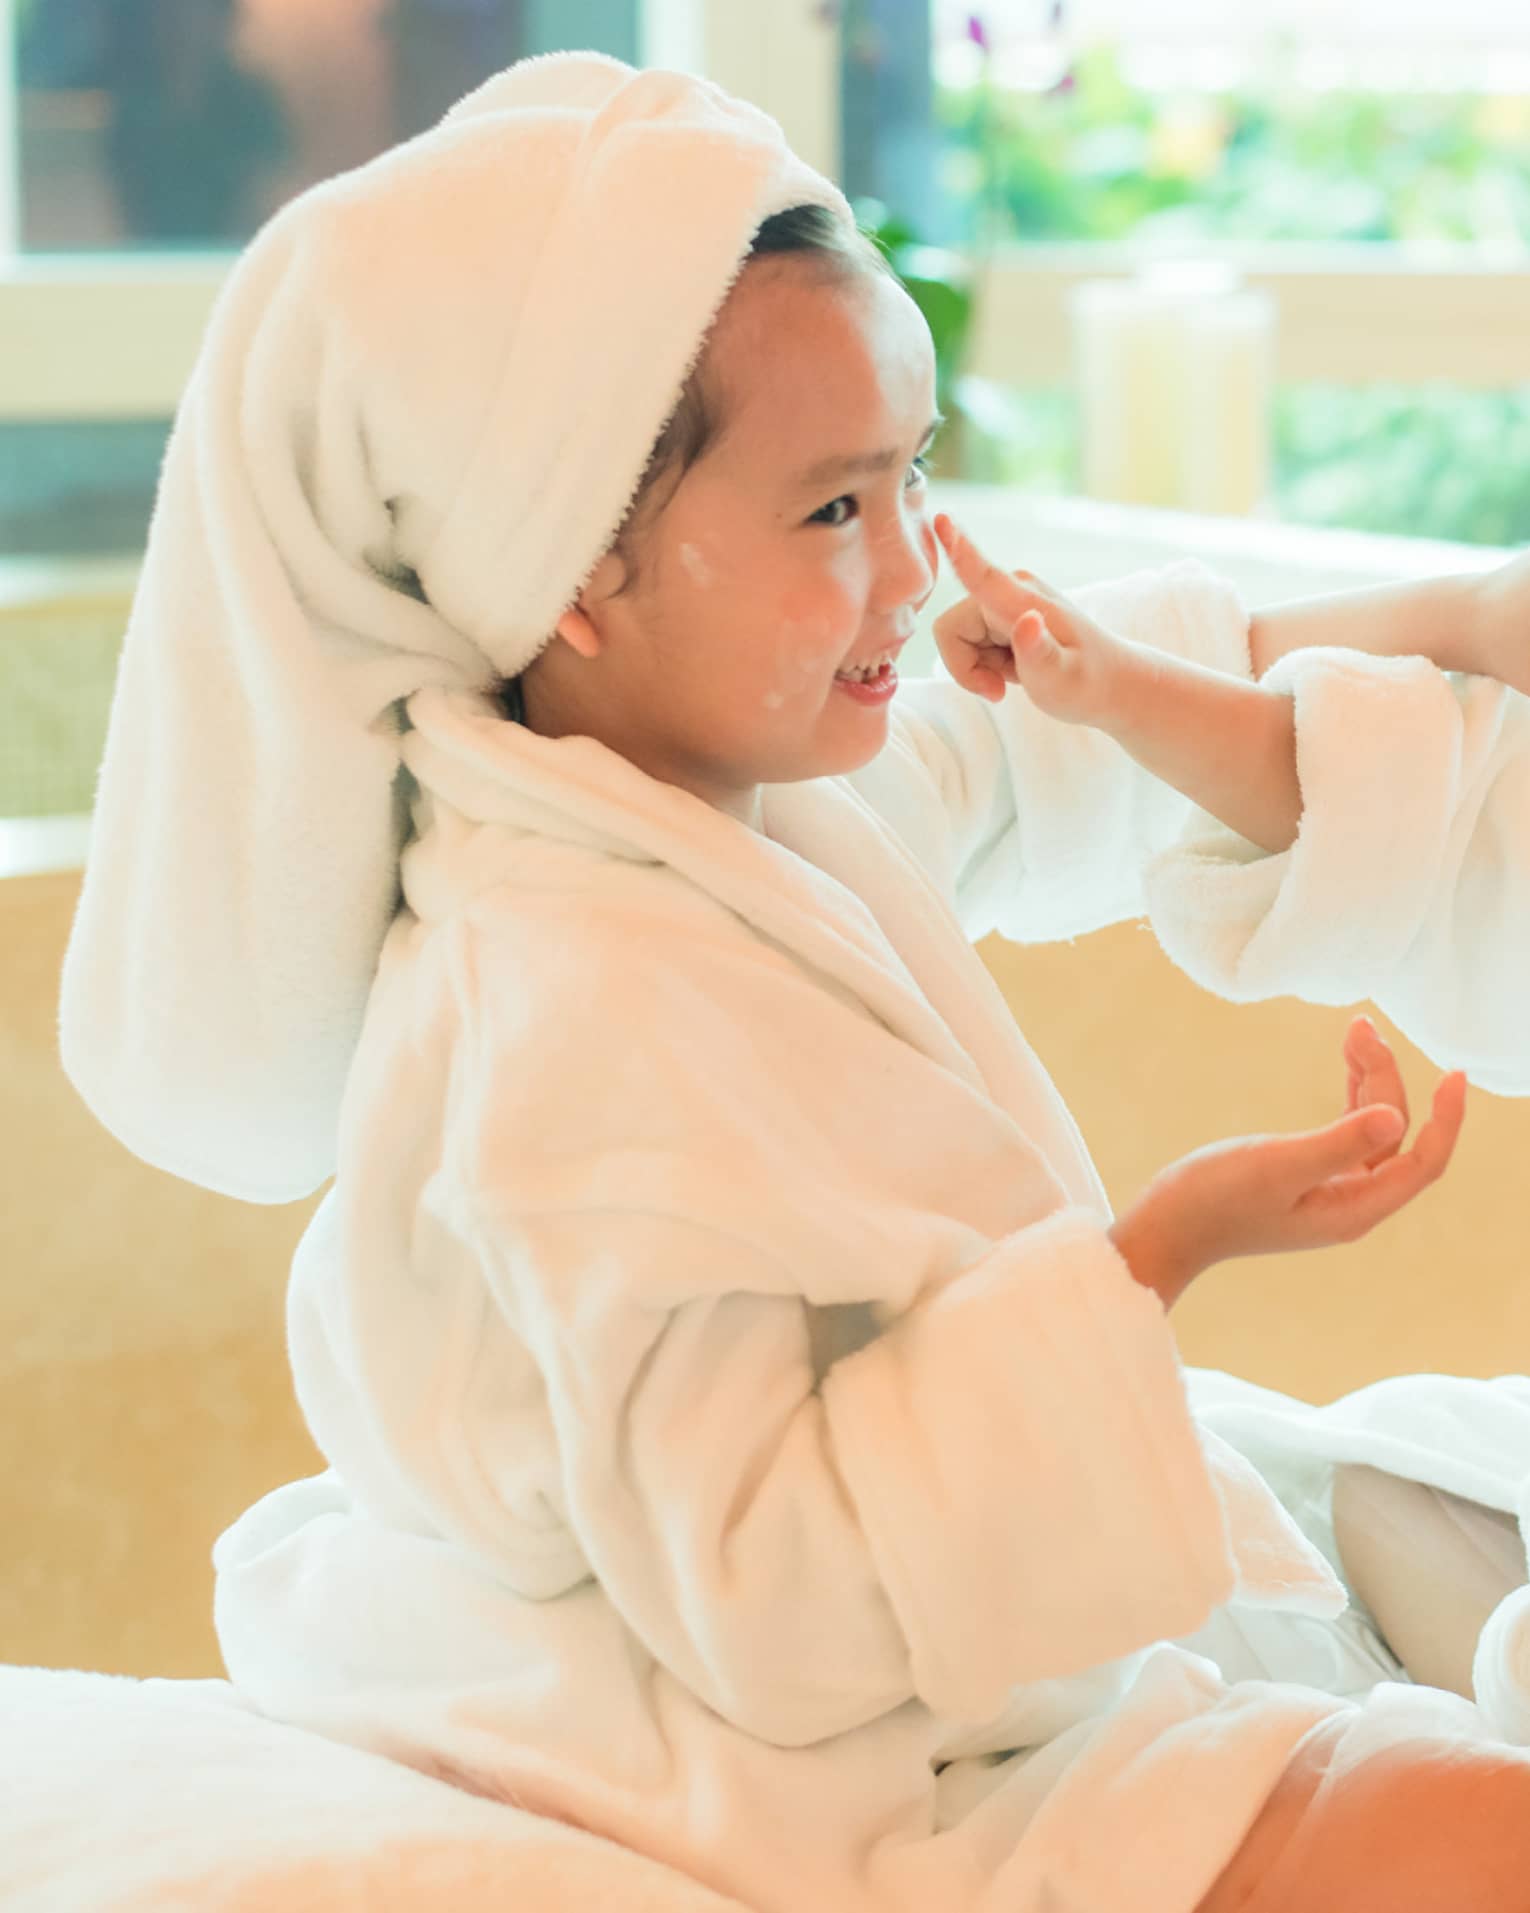 Two laughing young children in white bathrobes with towels around hair put lotion on each other's faces 